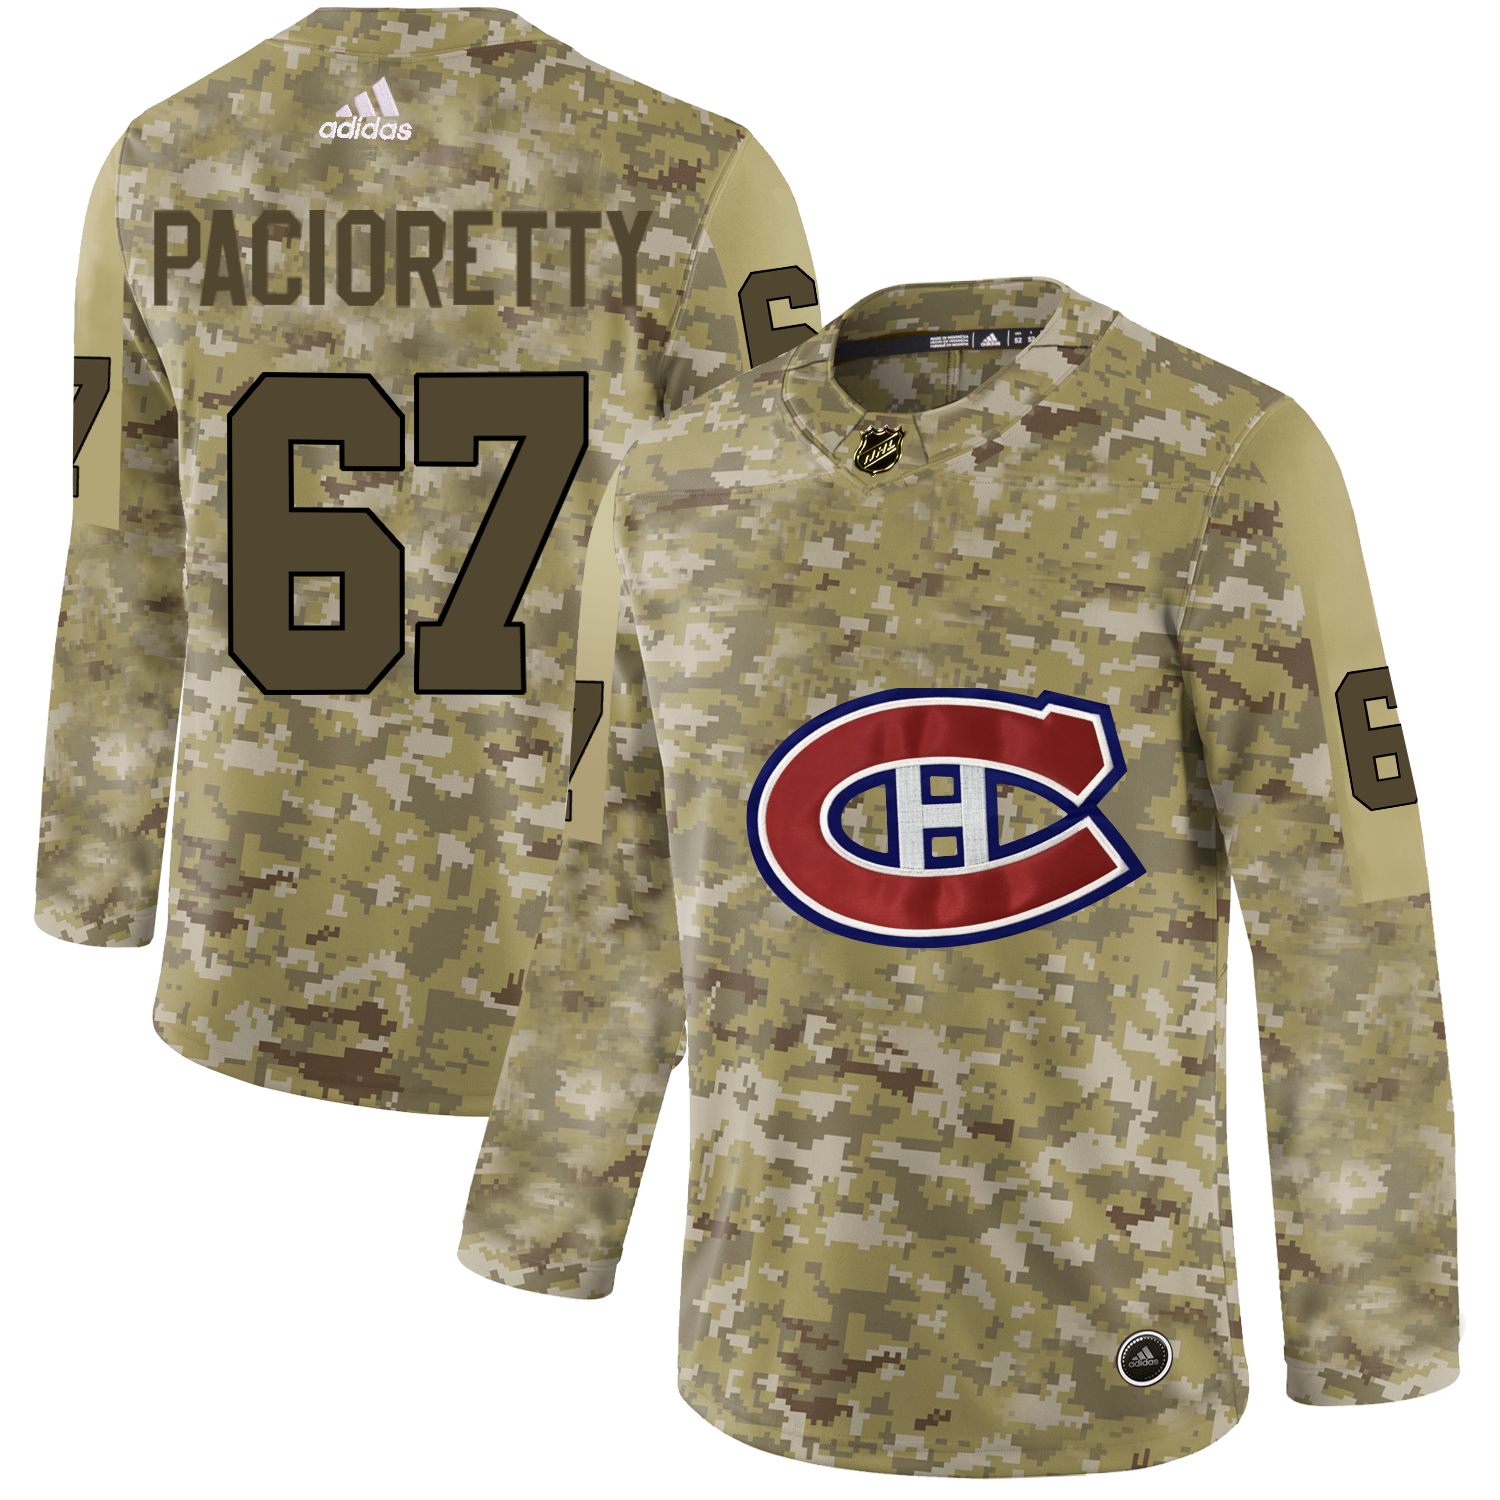 Adidas Canadiens #67 Max Pacioretty Camo Authentic Stitched NHL Jersey